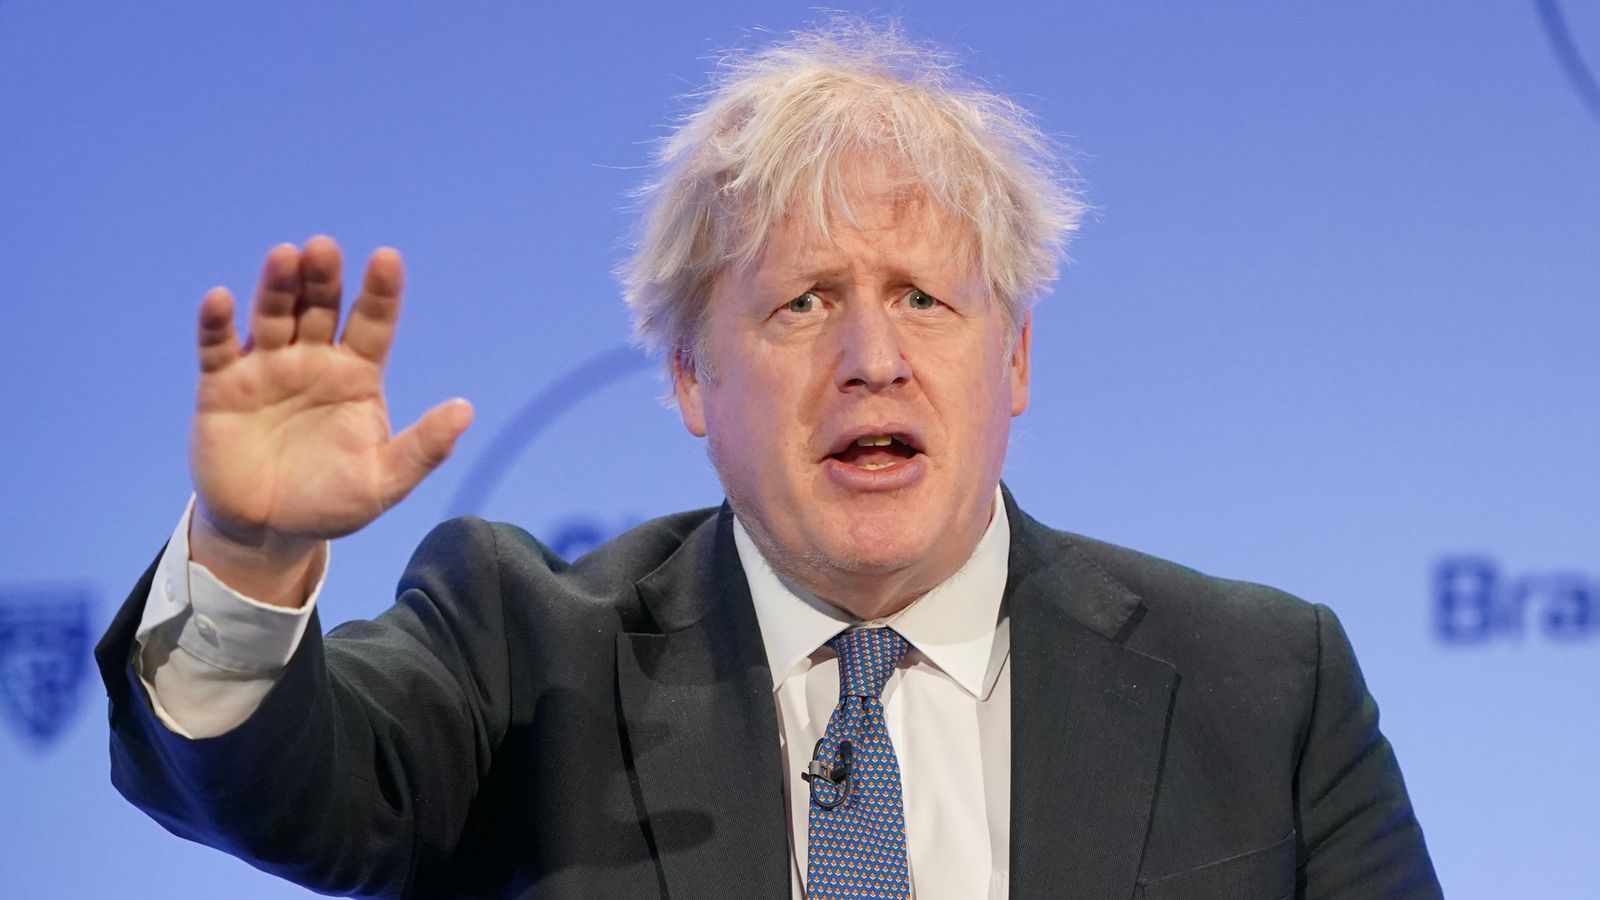 Boris Johnson: We have a sense of how the Comeback Kid plans to approach the COVID inquiry - but will it work?